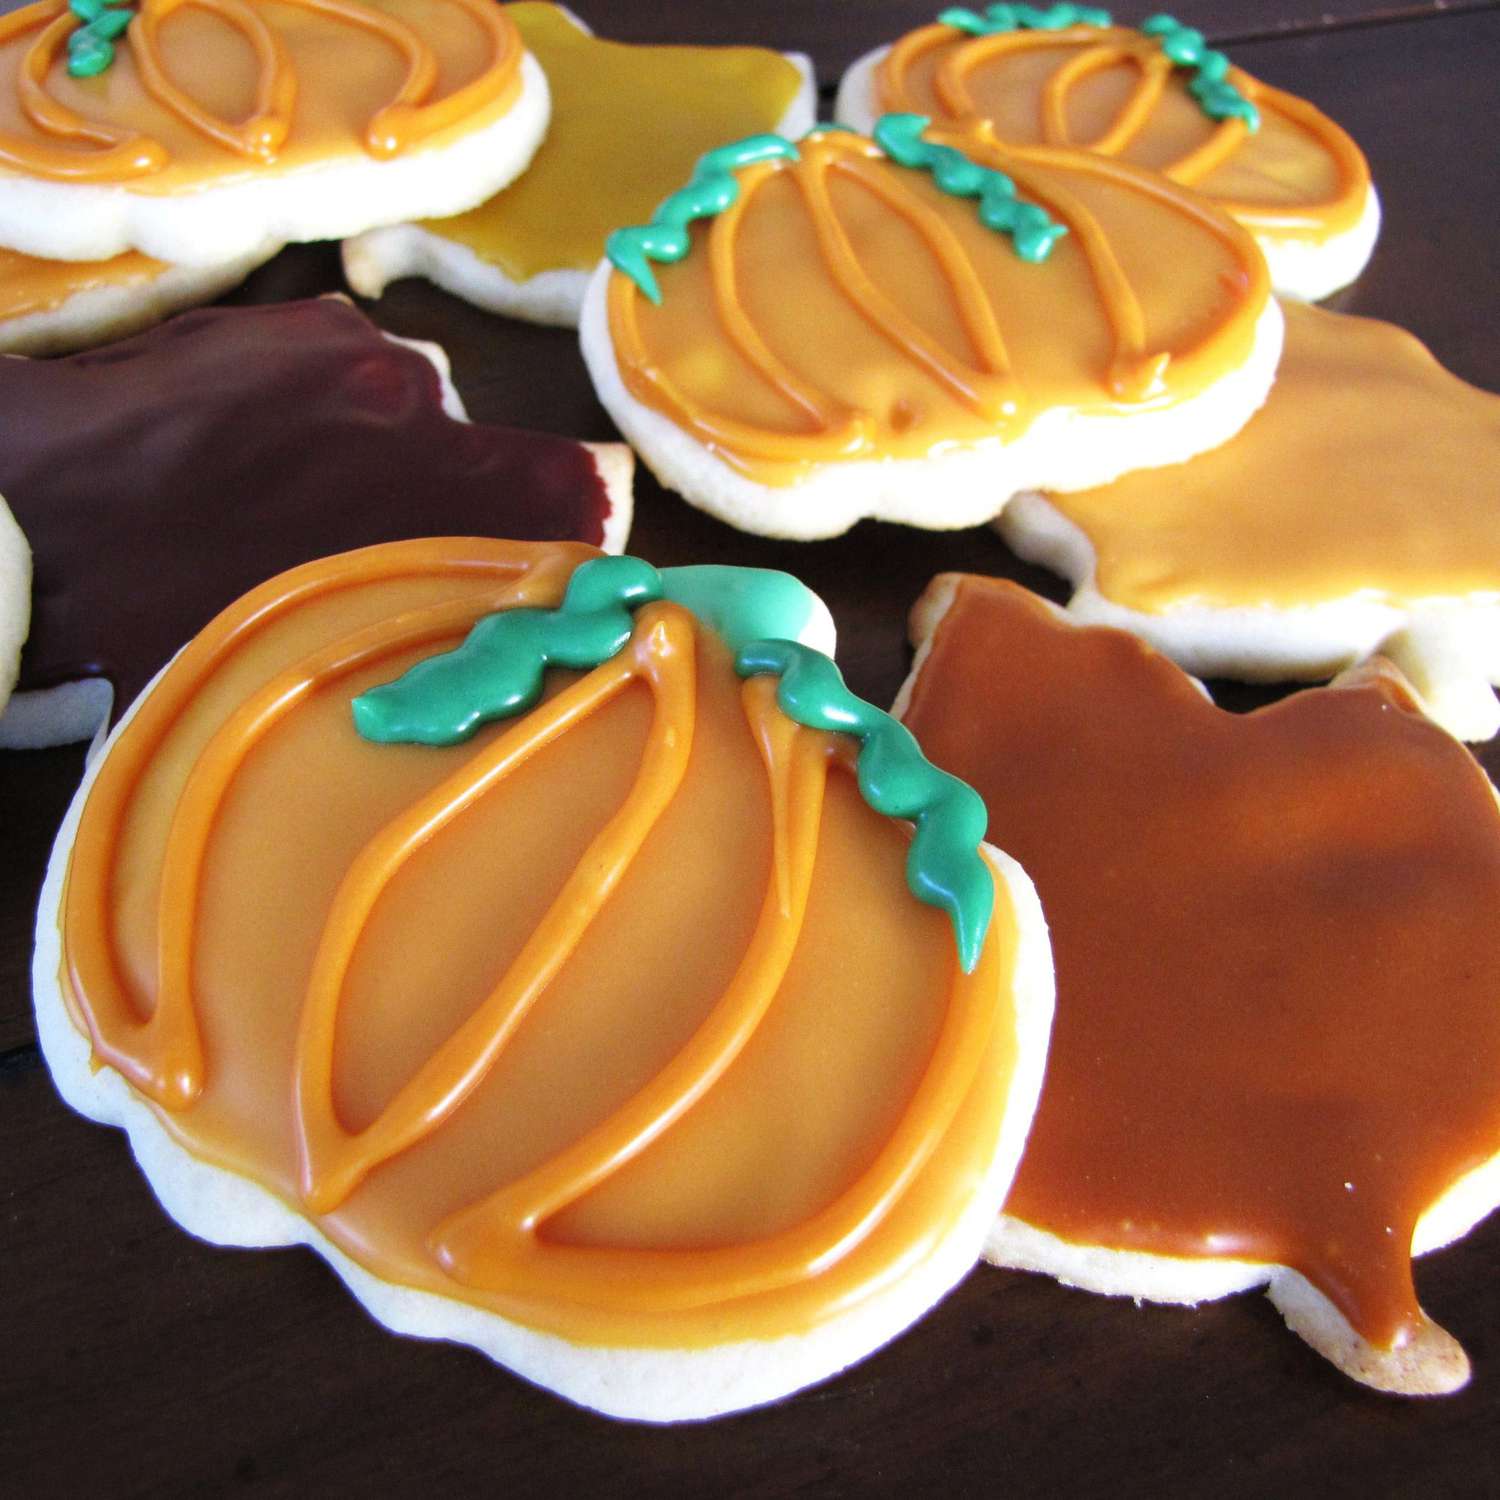 cookies decorated for fall: orange pumpkins with curly green vines and brown maple leaves